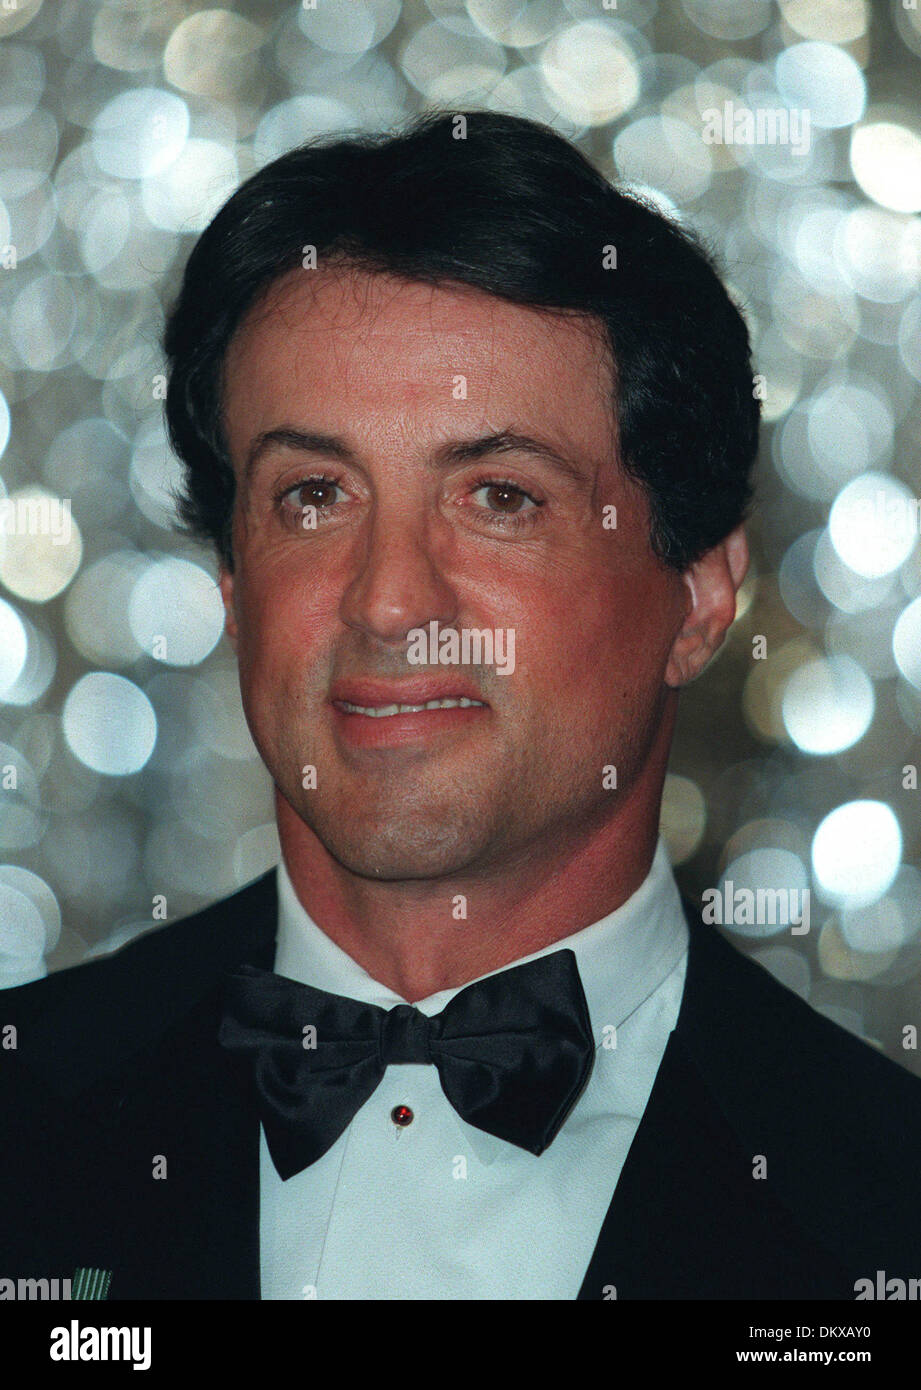 SYLVESTER STALLONE.ACTOR.17/01/1998.M31C16AC. Stock Photo